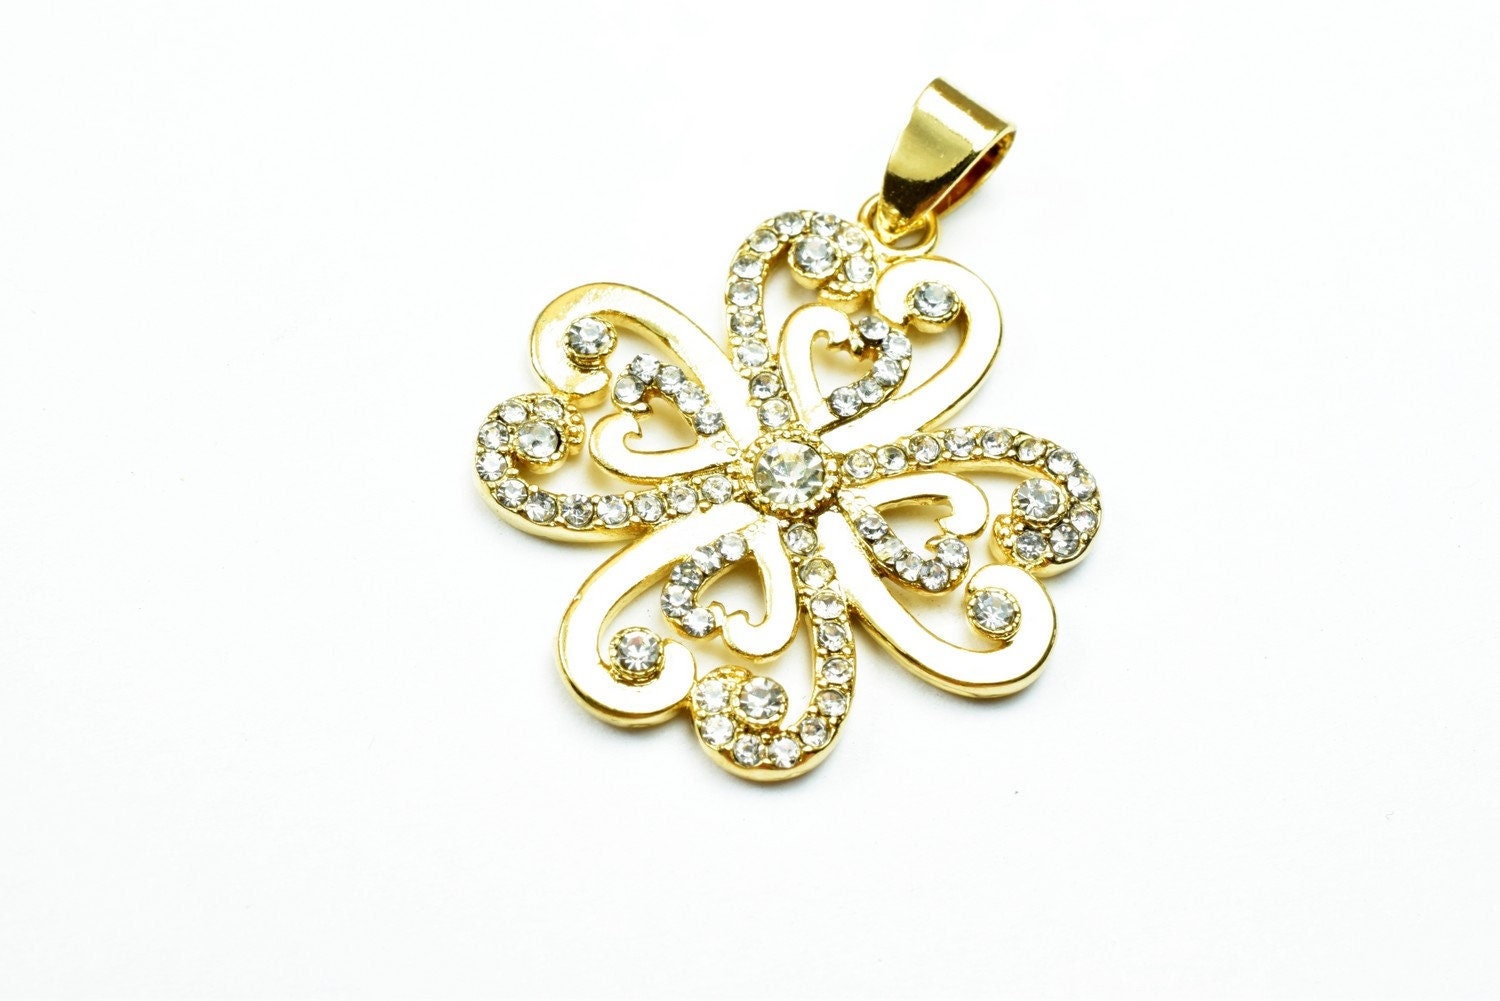 18k as gold filled* cross leaf clover flower pendant charms with rhinestone clear cubic zirconia size 28x25mm for jewelry making gp144